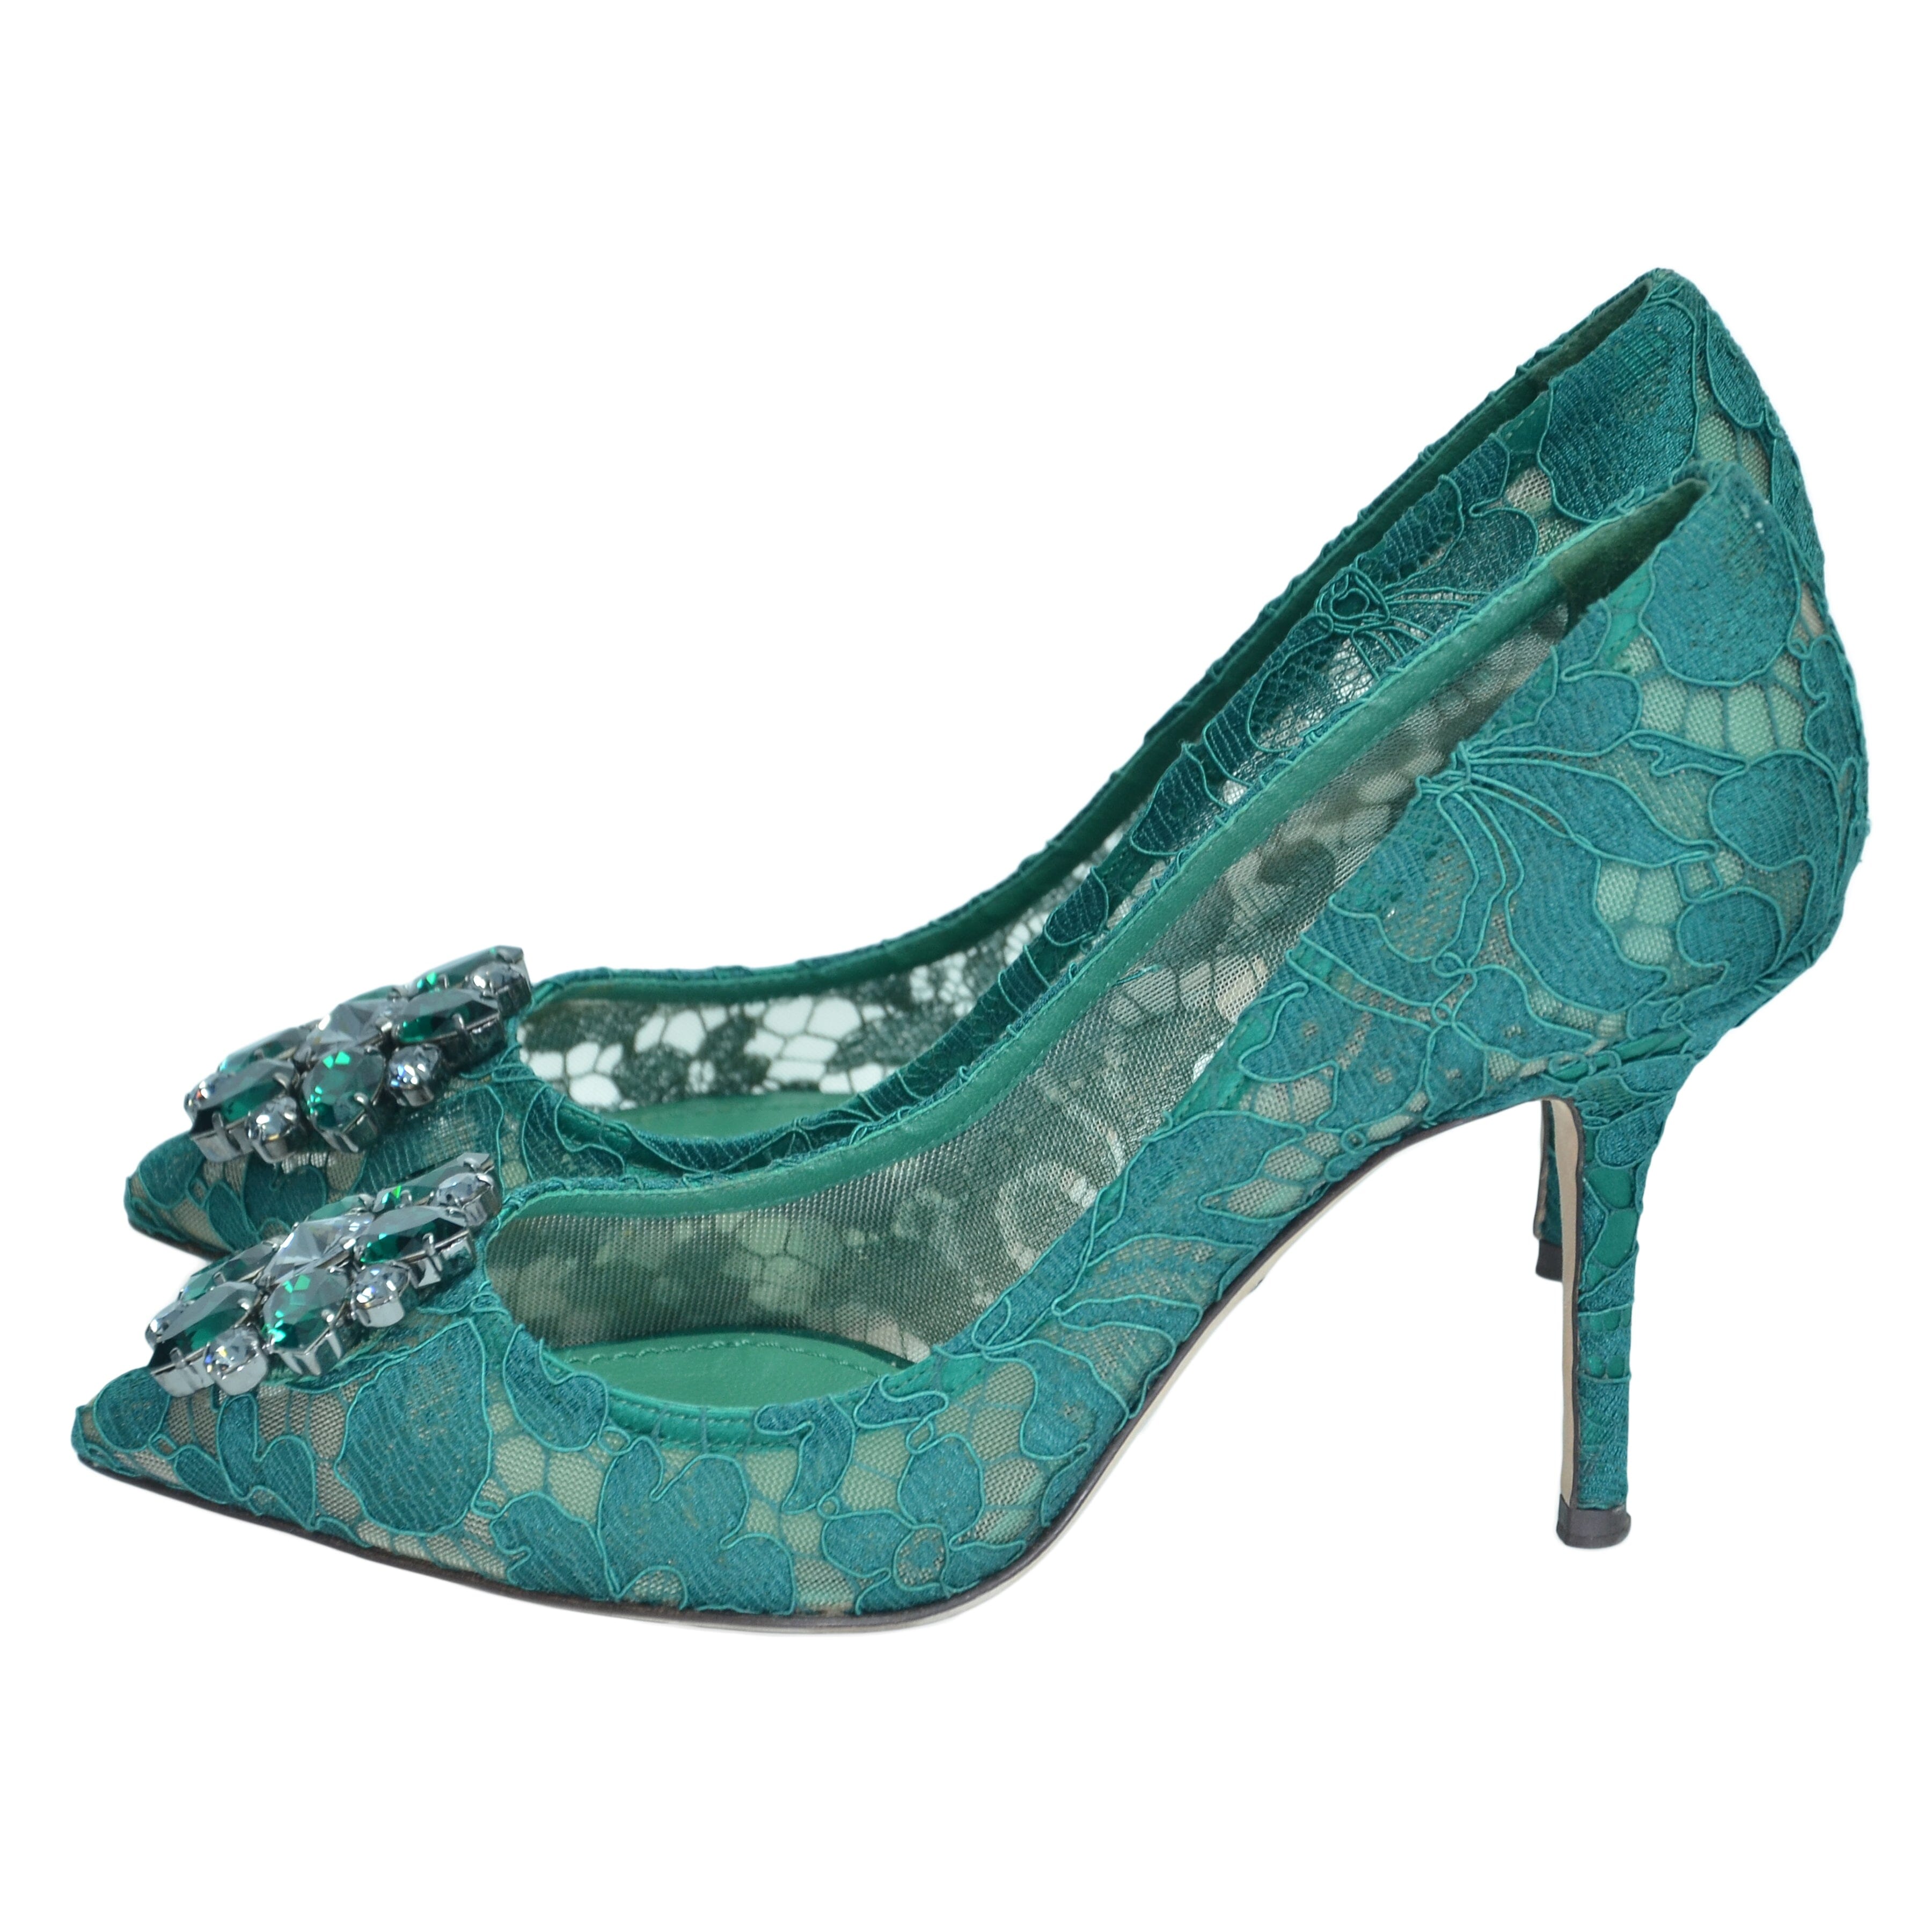 Green Lace Bellucci 90 Crystal Embellished Pumps Shoes Dolce & Gabbana 